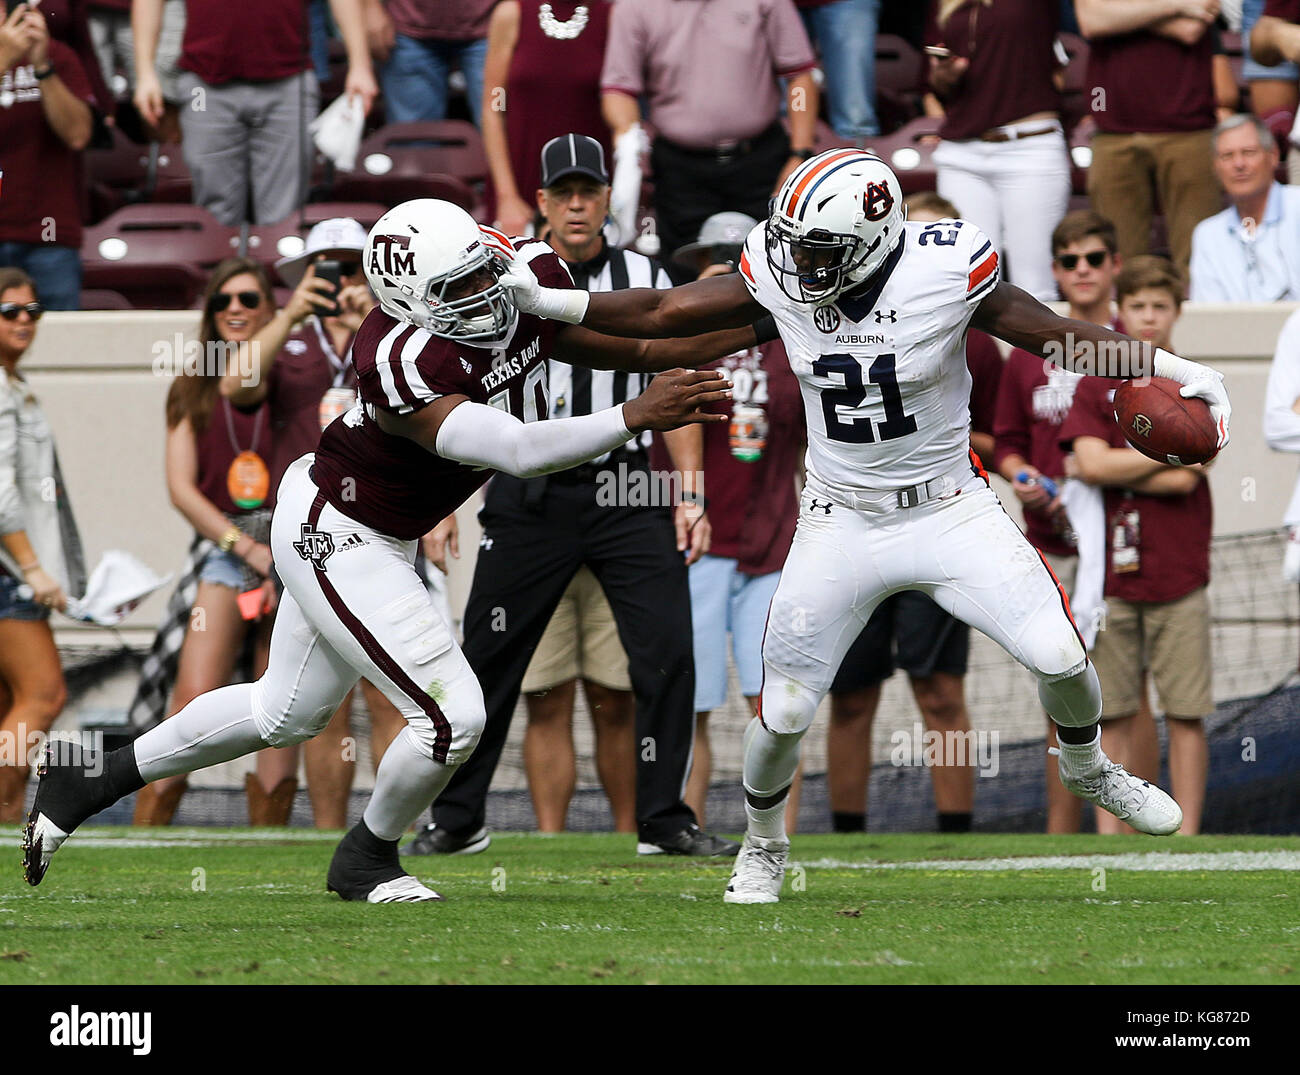 November 4, 2017: Auburn Tigers running back Kerryon Johnson (21) stiff arms Texas A&M Aggies defensive lineman Jarrett Johnson (40) in the first quarter during the NCAA football game between the Auburn Tigers and the Texas A&M Aggies at Kyle Field in College Station, TX; John Glaser/CSM. Stock Photo